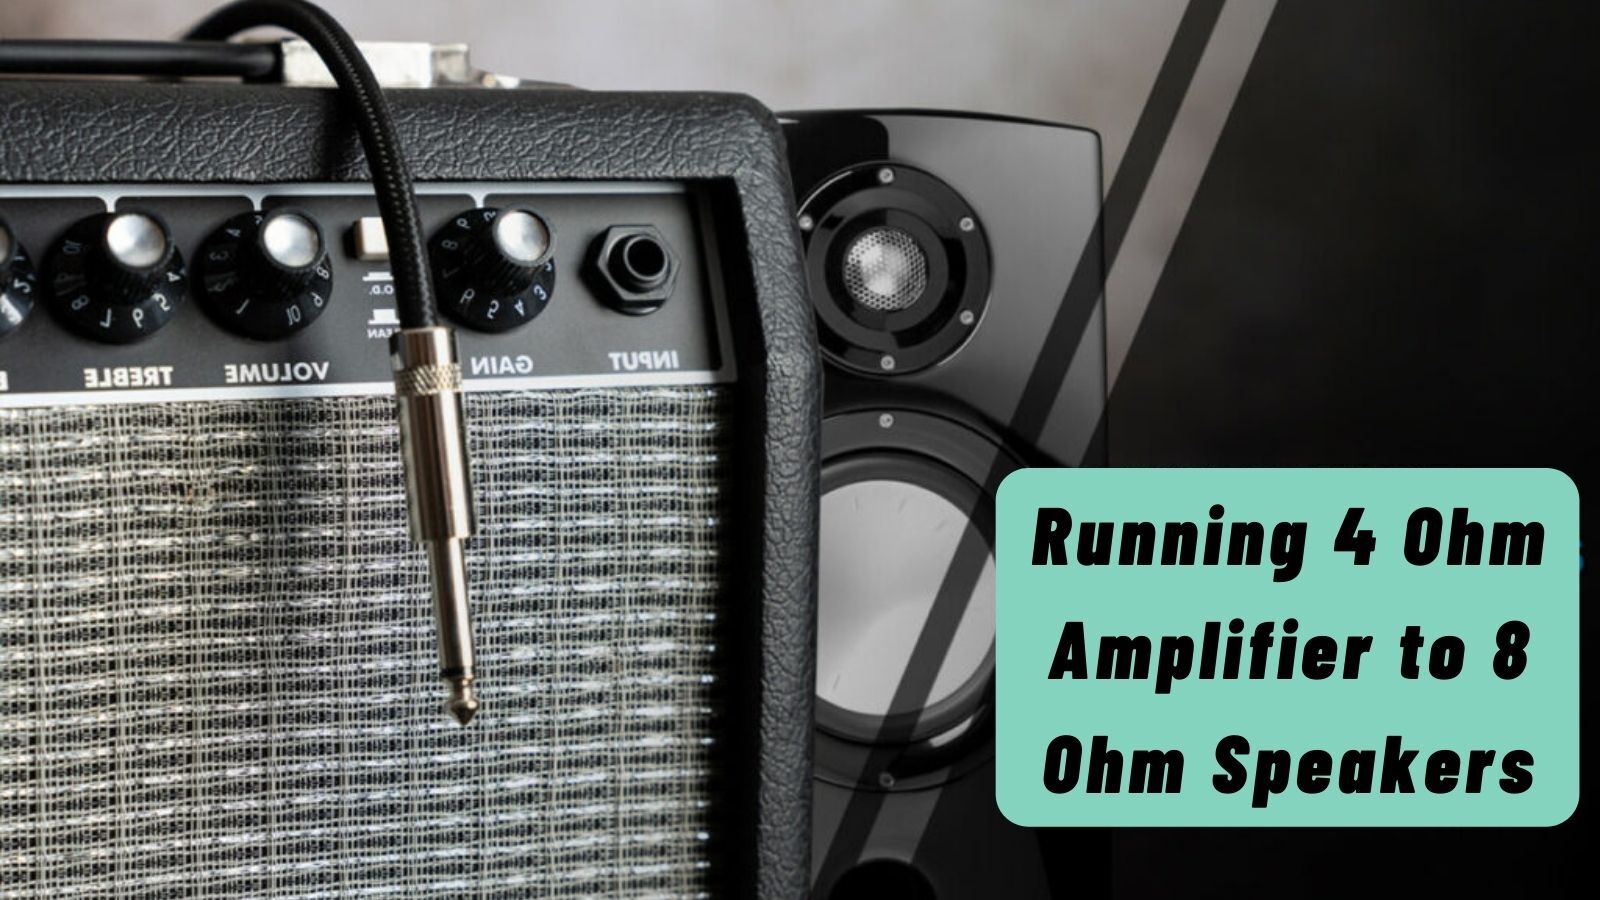 Can You Hook Up 8 Ohm Speakers to a 4 Ohm Amplifier? (Yes, But Watch Out!)